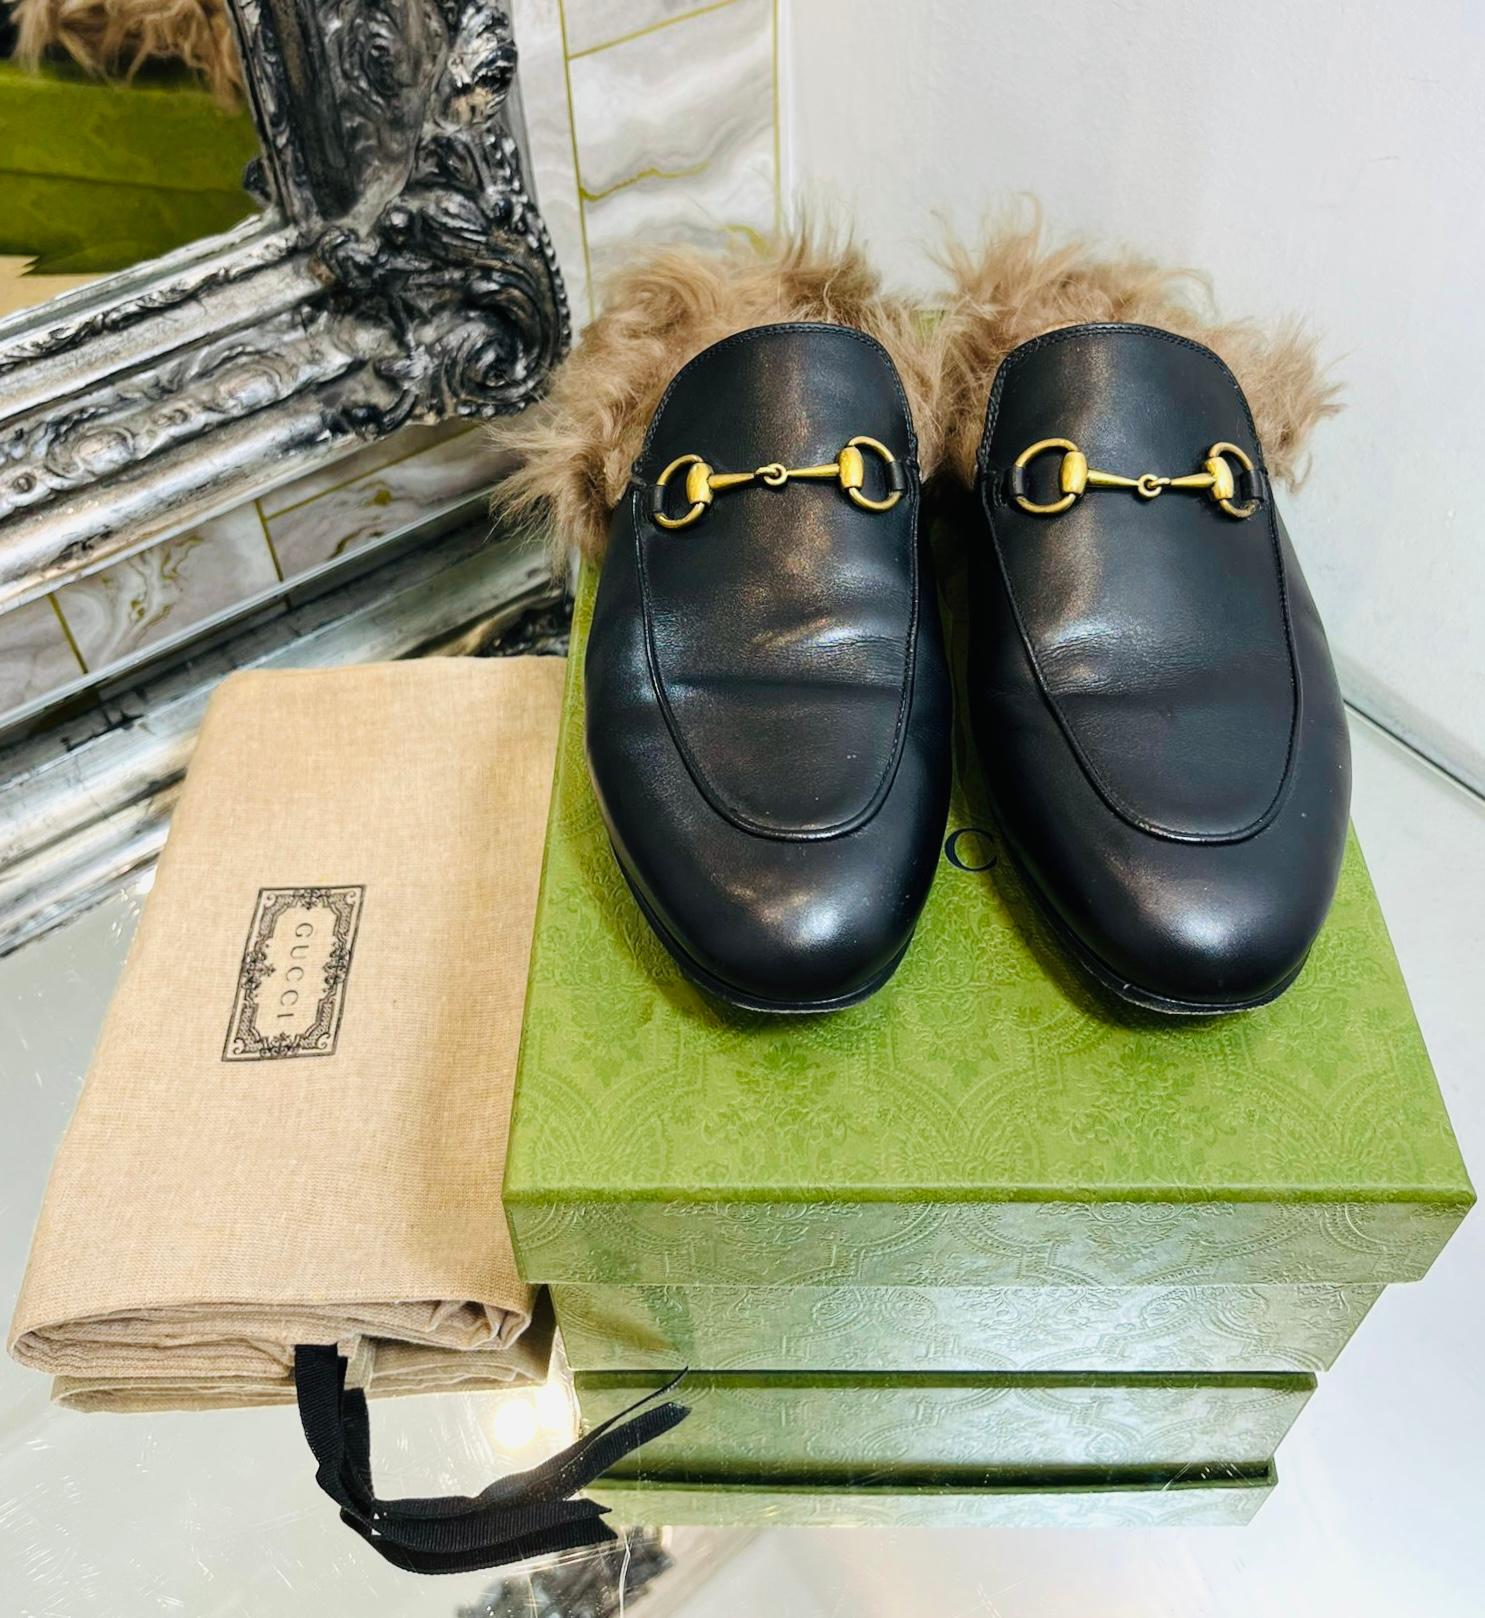 Gucci Princetown Leather Shearling-Lined Mules

Black slip-on mules designed with the brand's signature gold Horsebit embellishment to the front.

Detailed with shearling lining, almond toes and flat leather soles.

Size – 40

Condition – Very Good